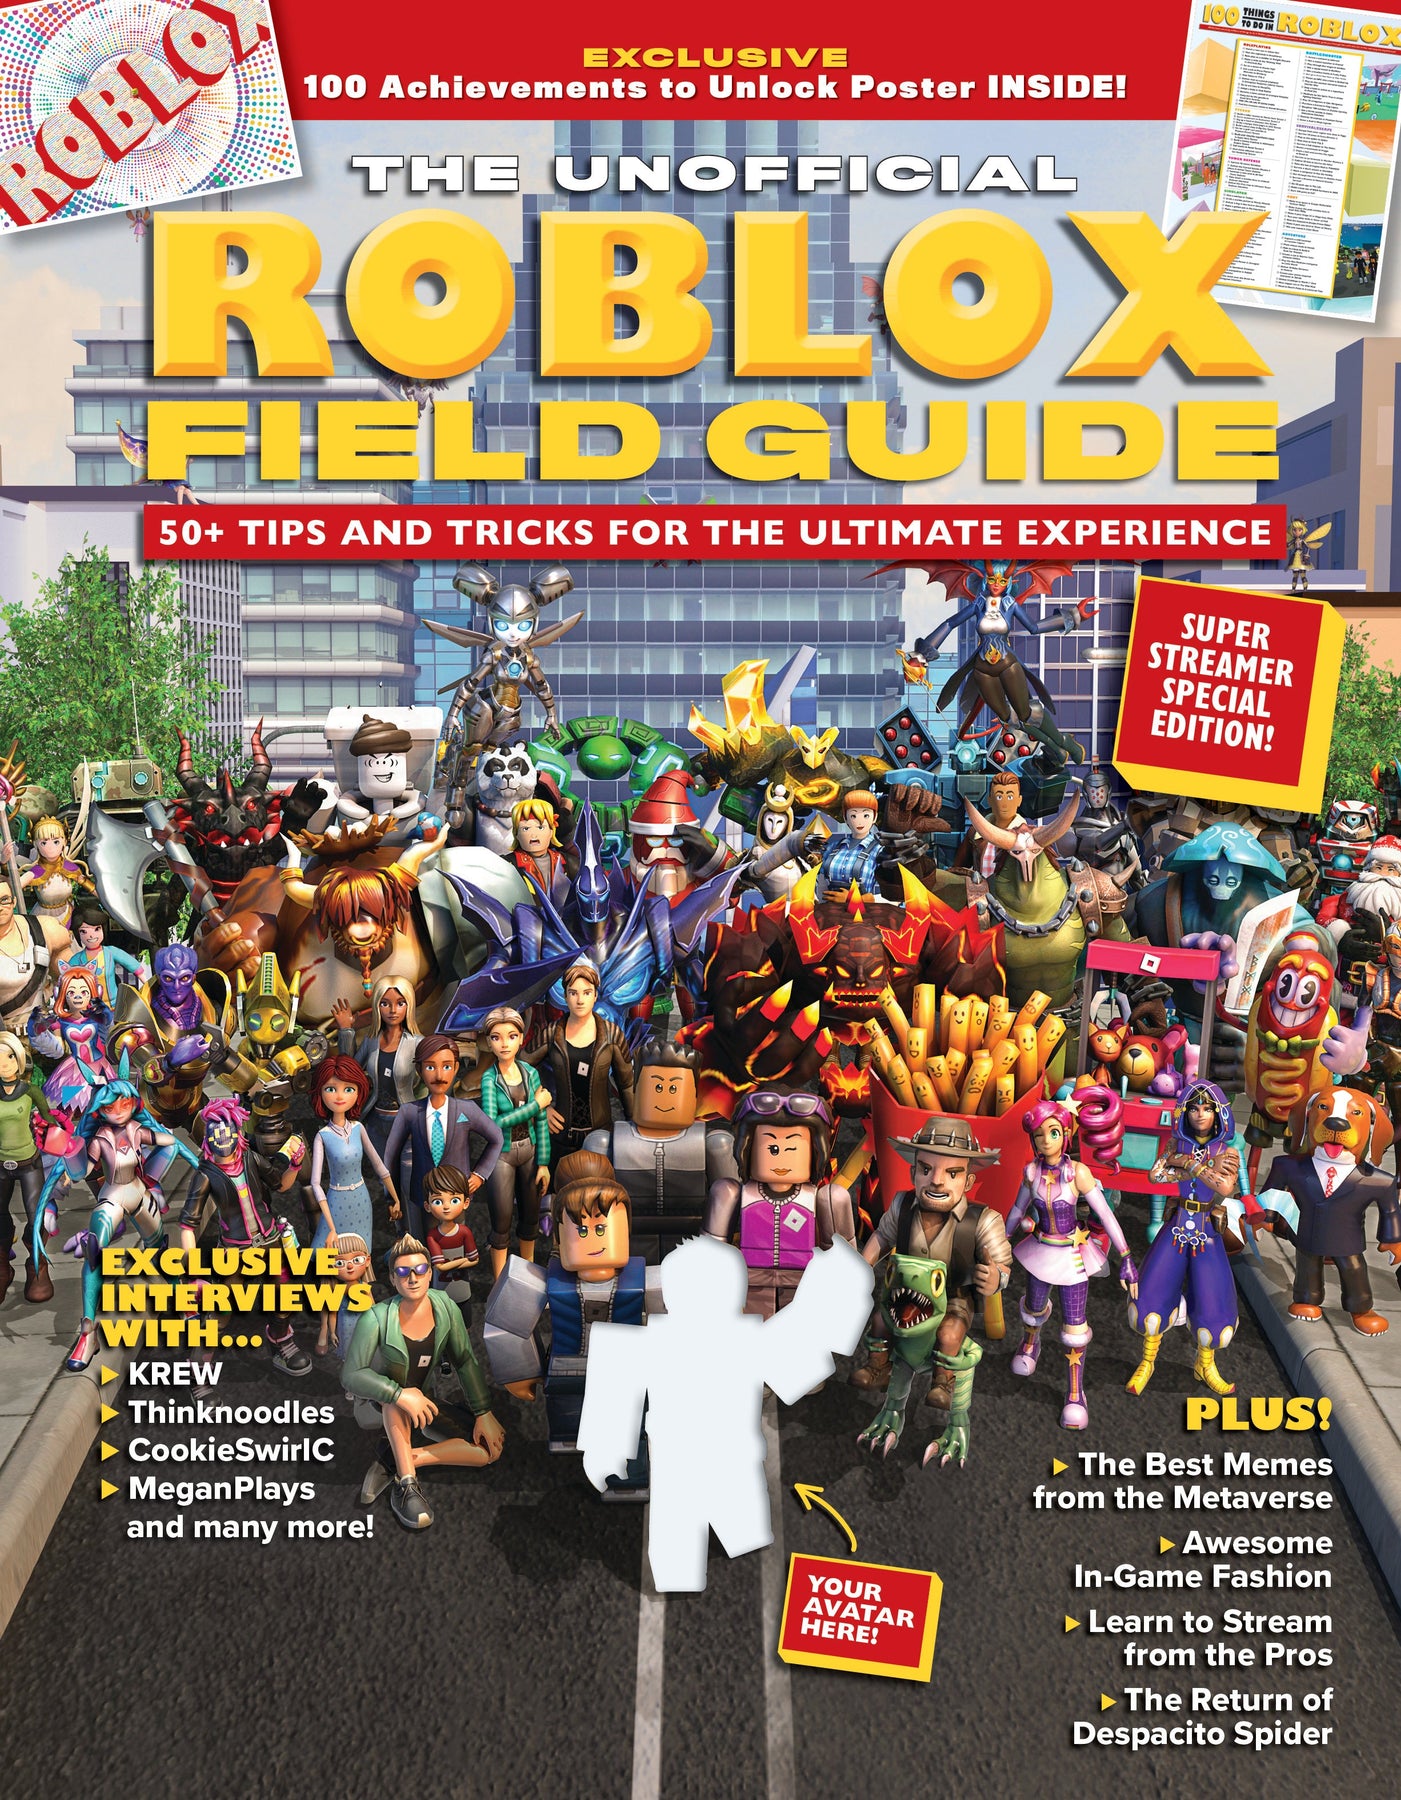 – Shop Field and The for US 50 Unofficial Guide: Roblox Magazine Over U the Tips - Tricks